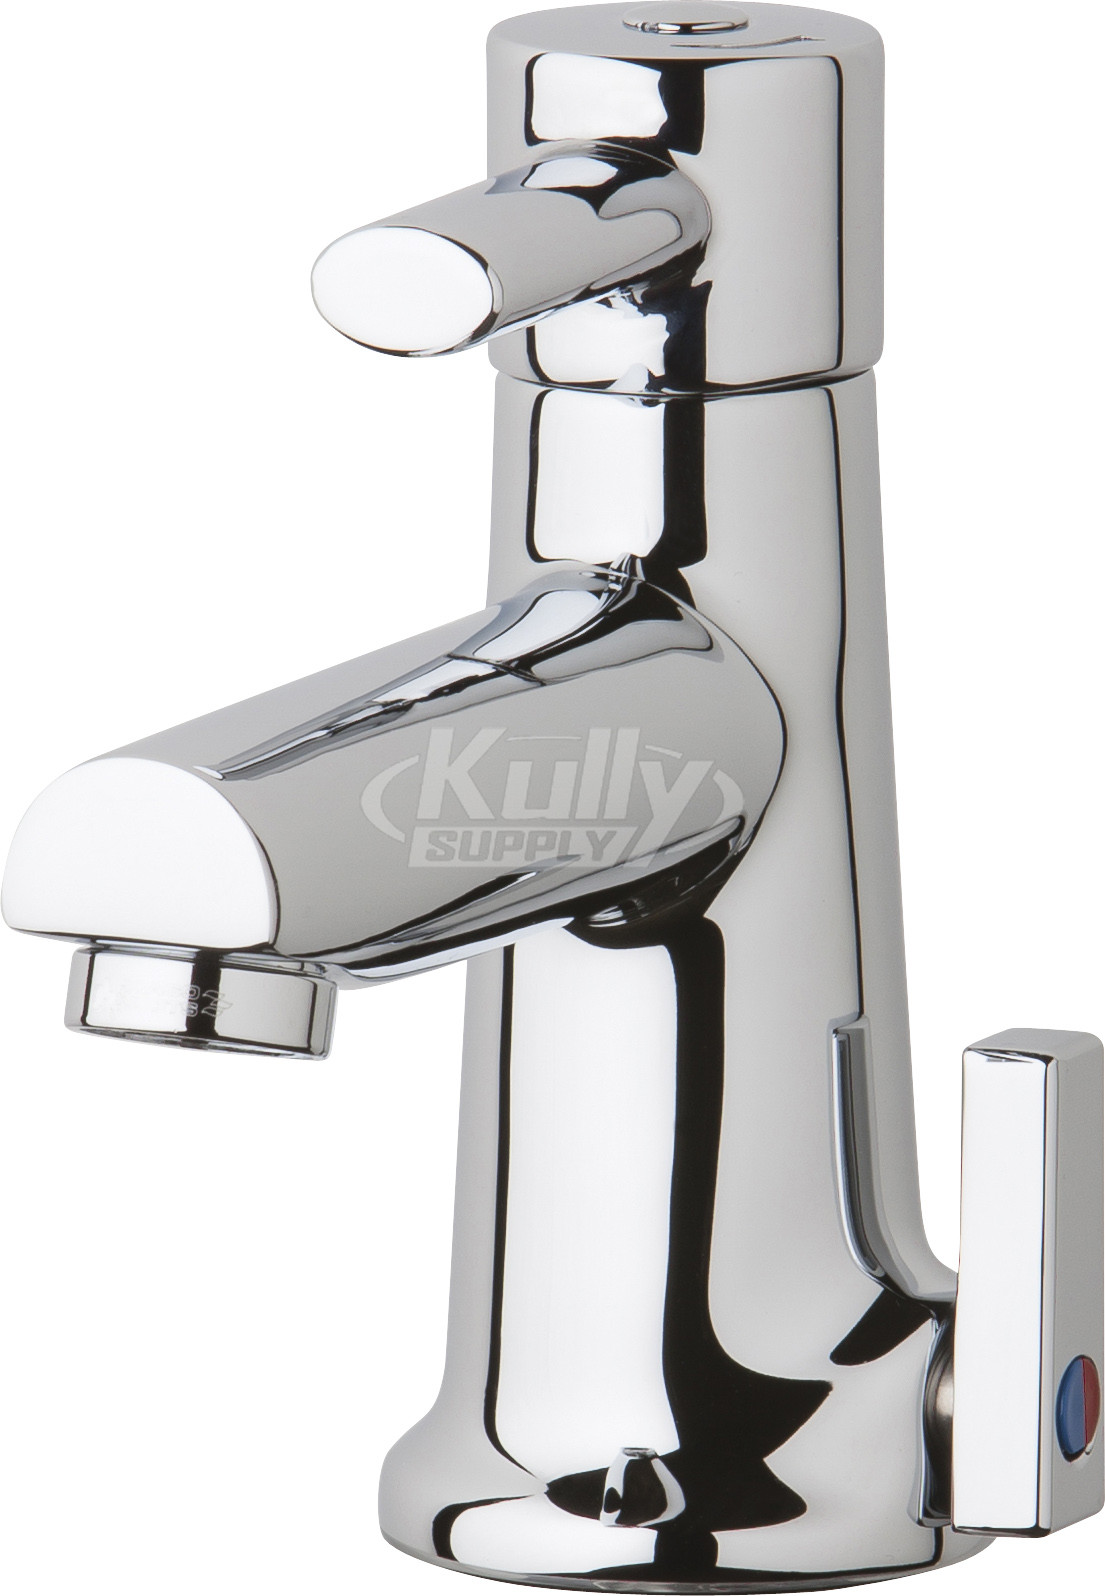 Chicago 3512-E2805AB Hot & Cold Water Mixing Sink Faucet